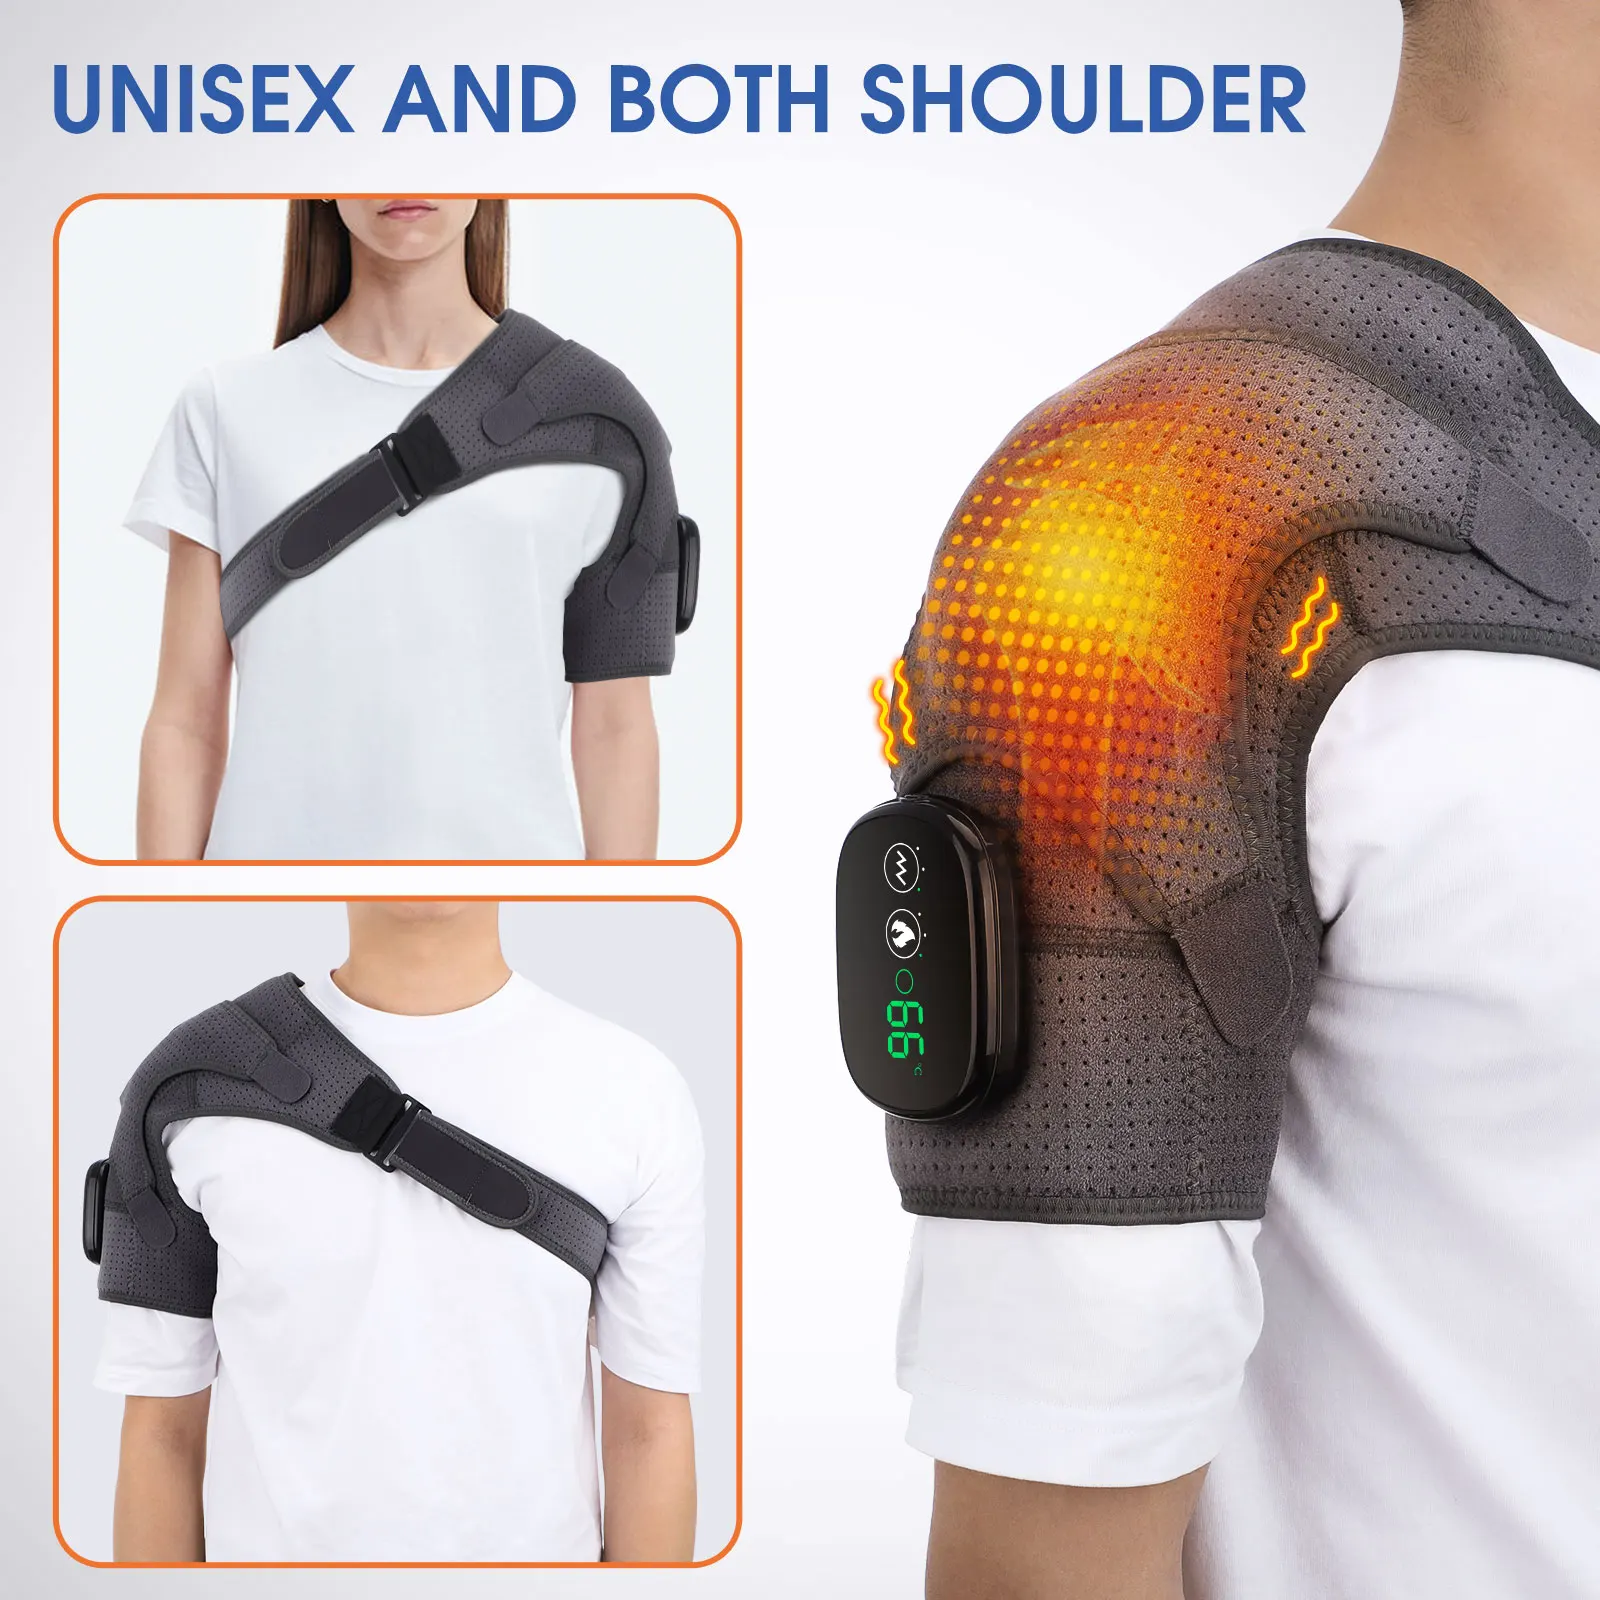 https://ae01.alicdn.com/kf/S2f758995420e4c9593d6fb751033ef95W/Electric-Heating-Shoulder-Massager-for-Pain-Relief-Heating-Pad-Vibration-Knee-Elbow-Massager-Shoulder-Brace-Support.jpg